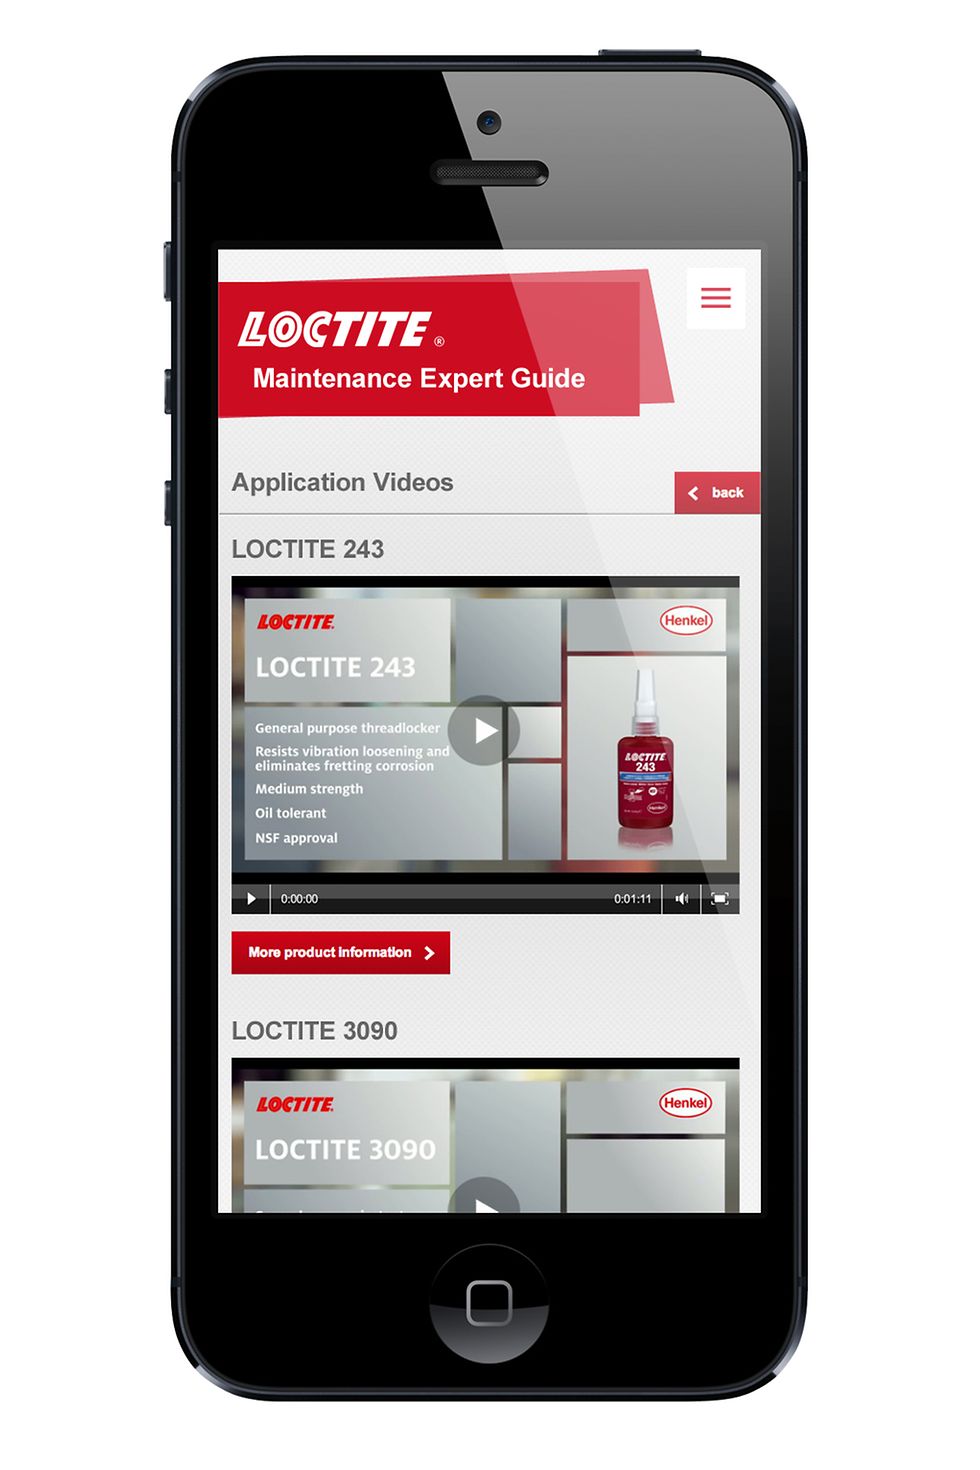 
The Loctite Maintenance Expert Guide.